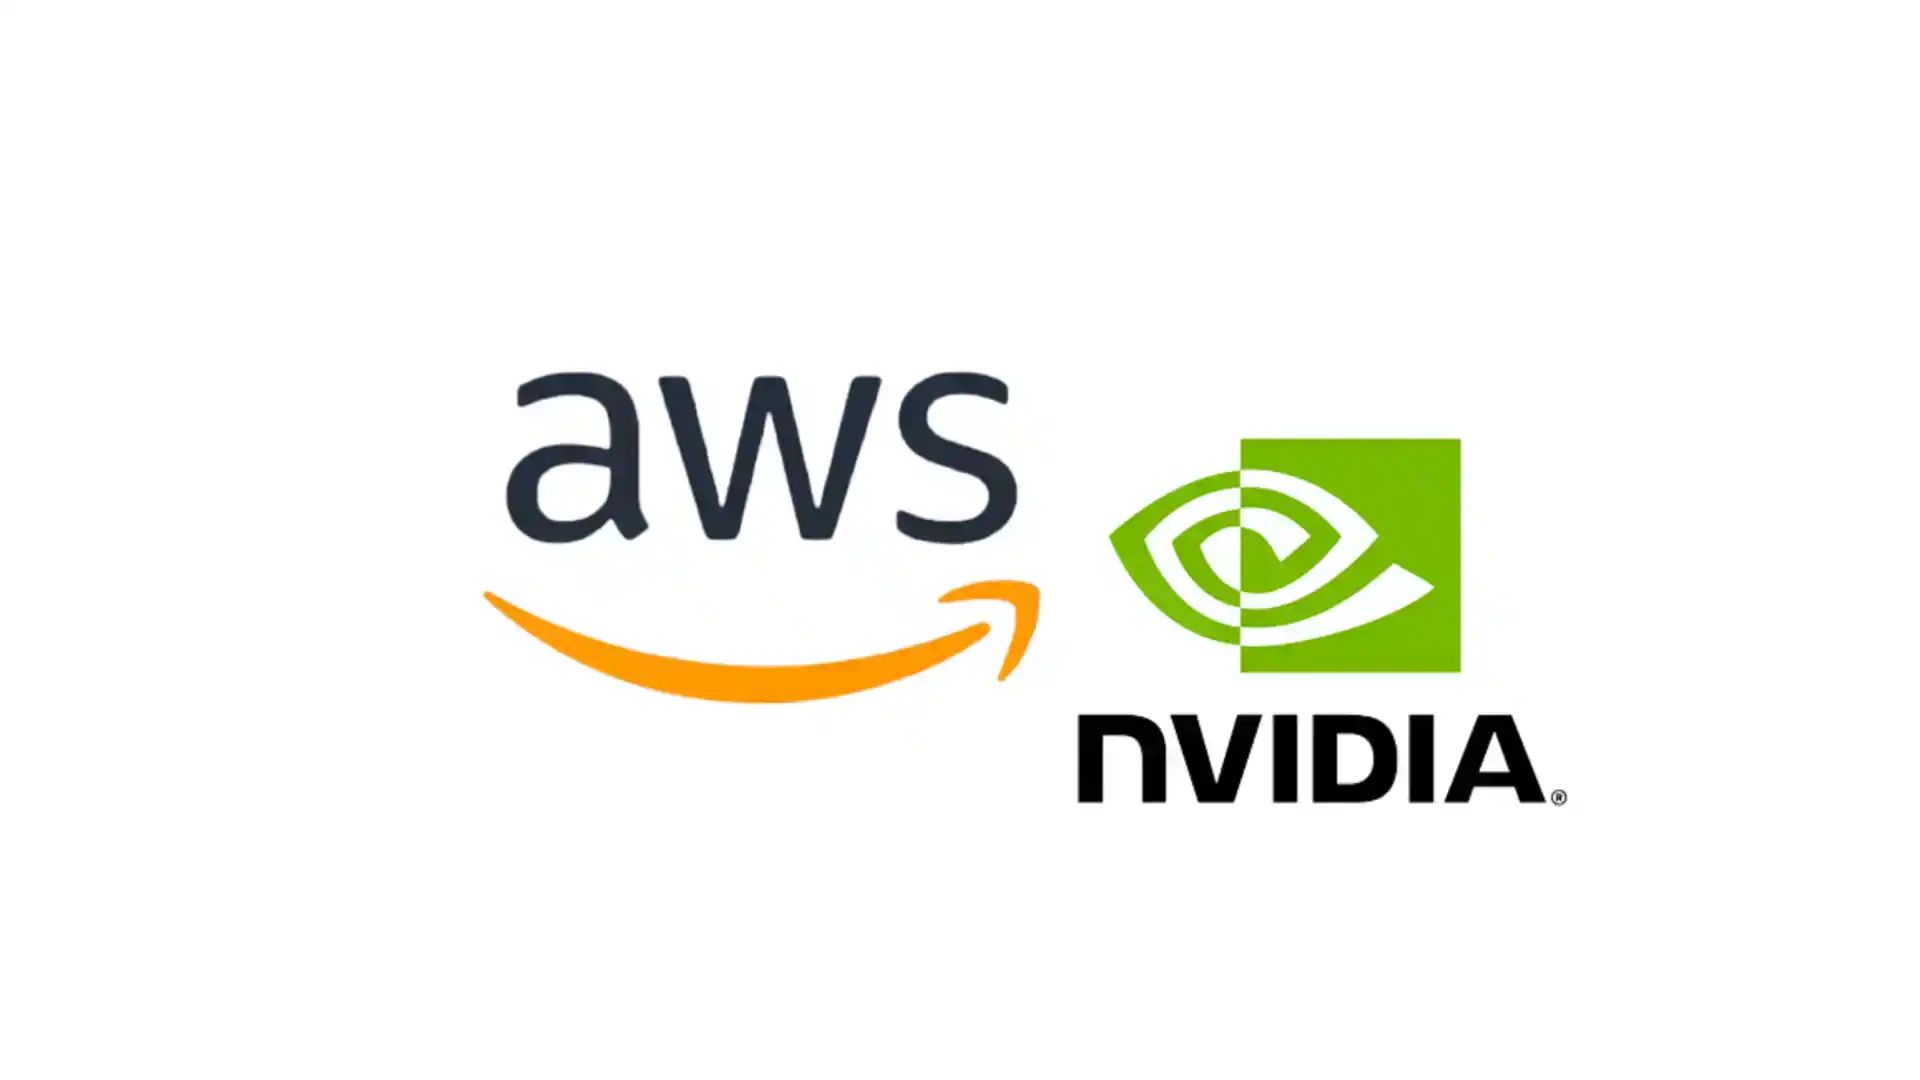 An image depicting AWS and NVIDIA's logos side by side, symbolizing their collaboration in driving generative AI innovations.